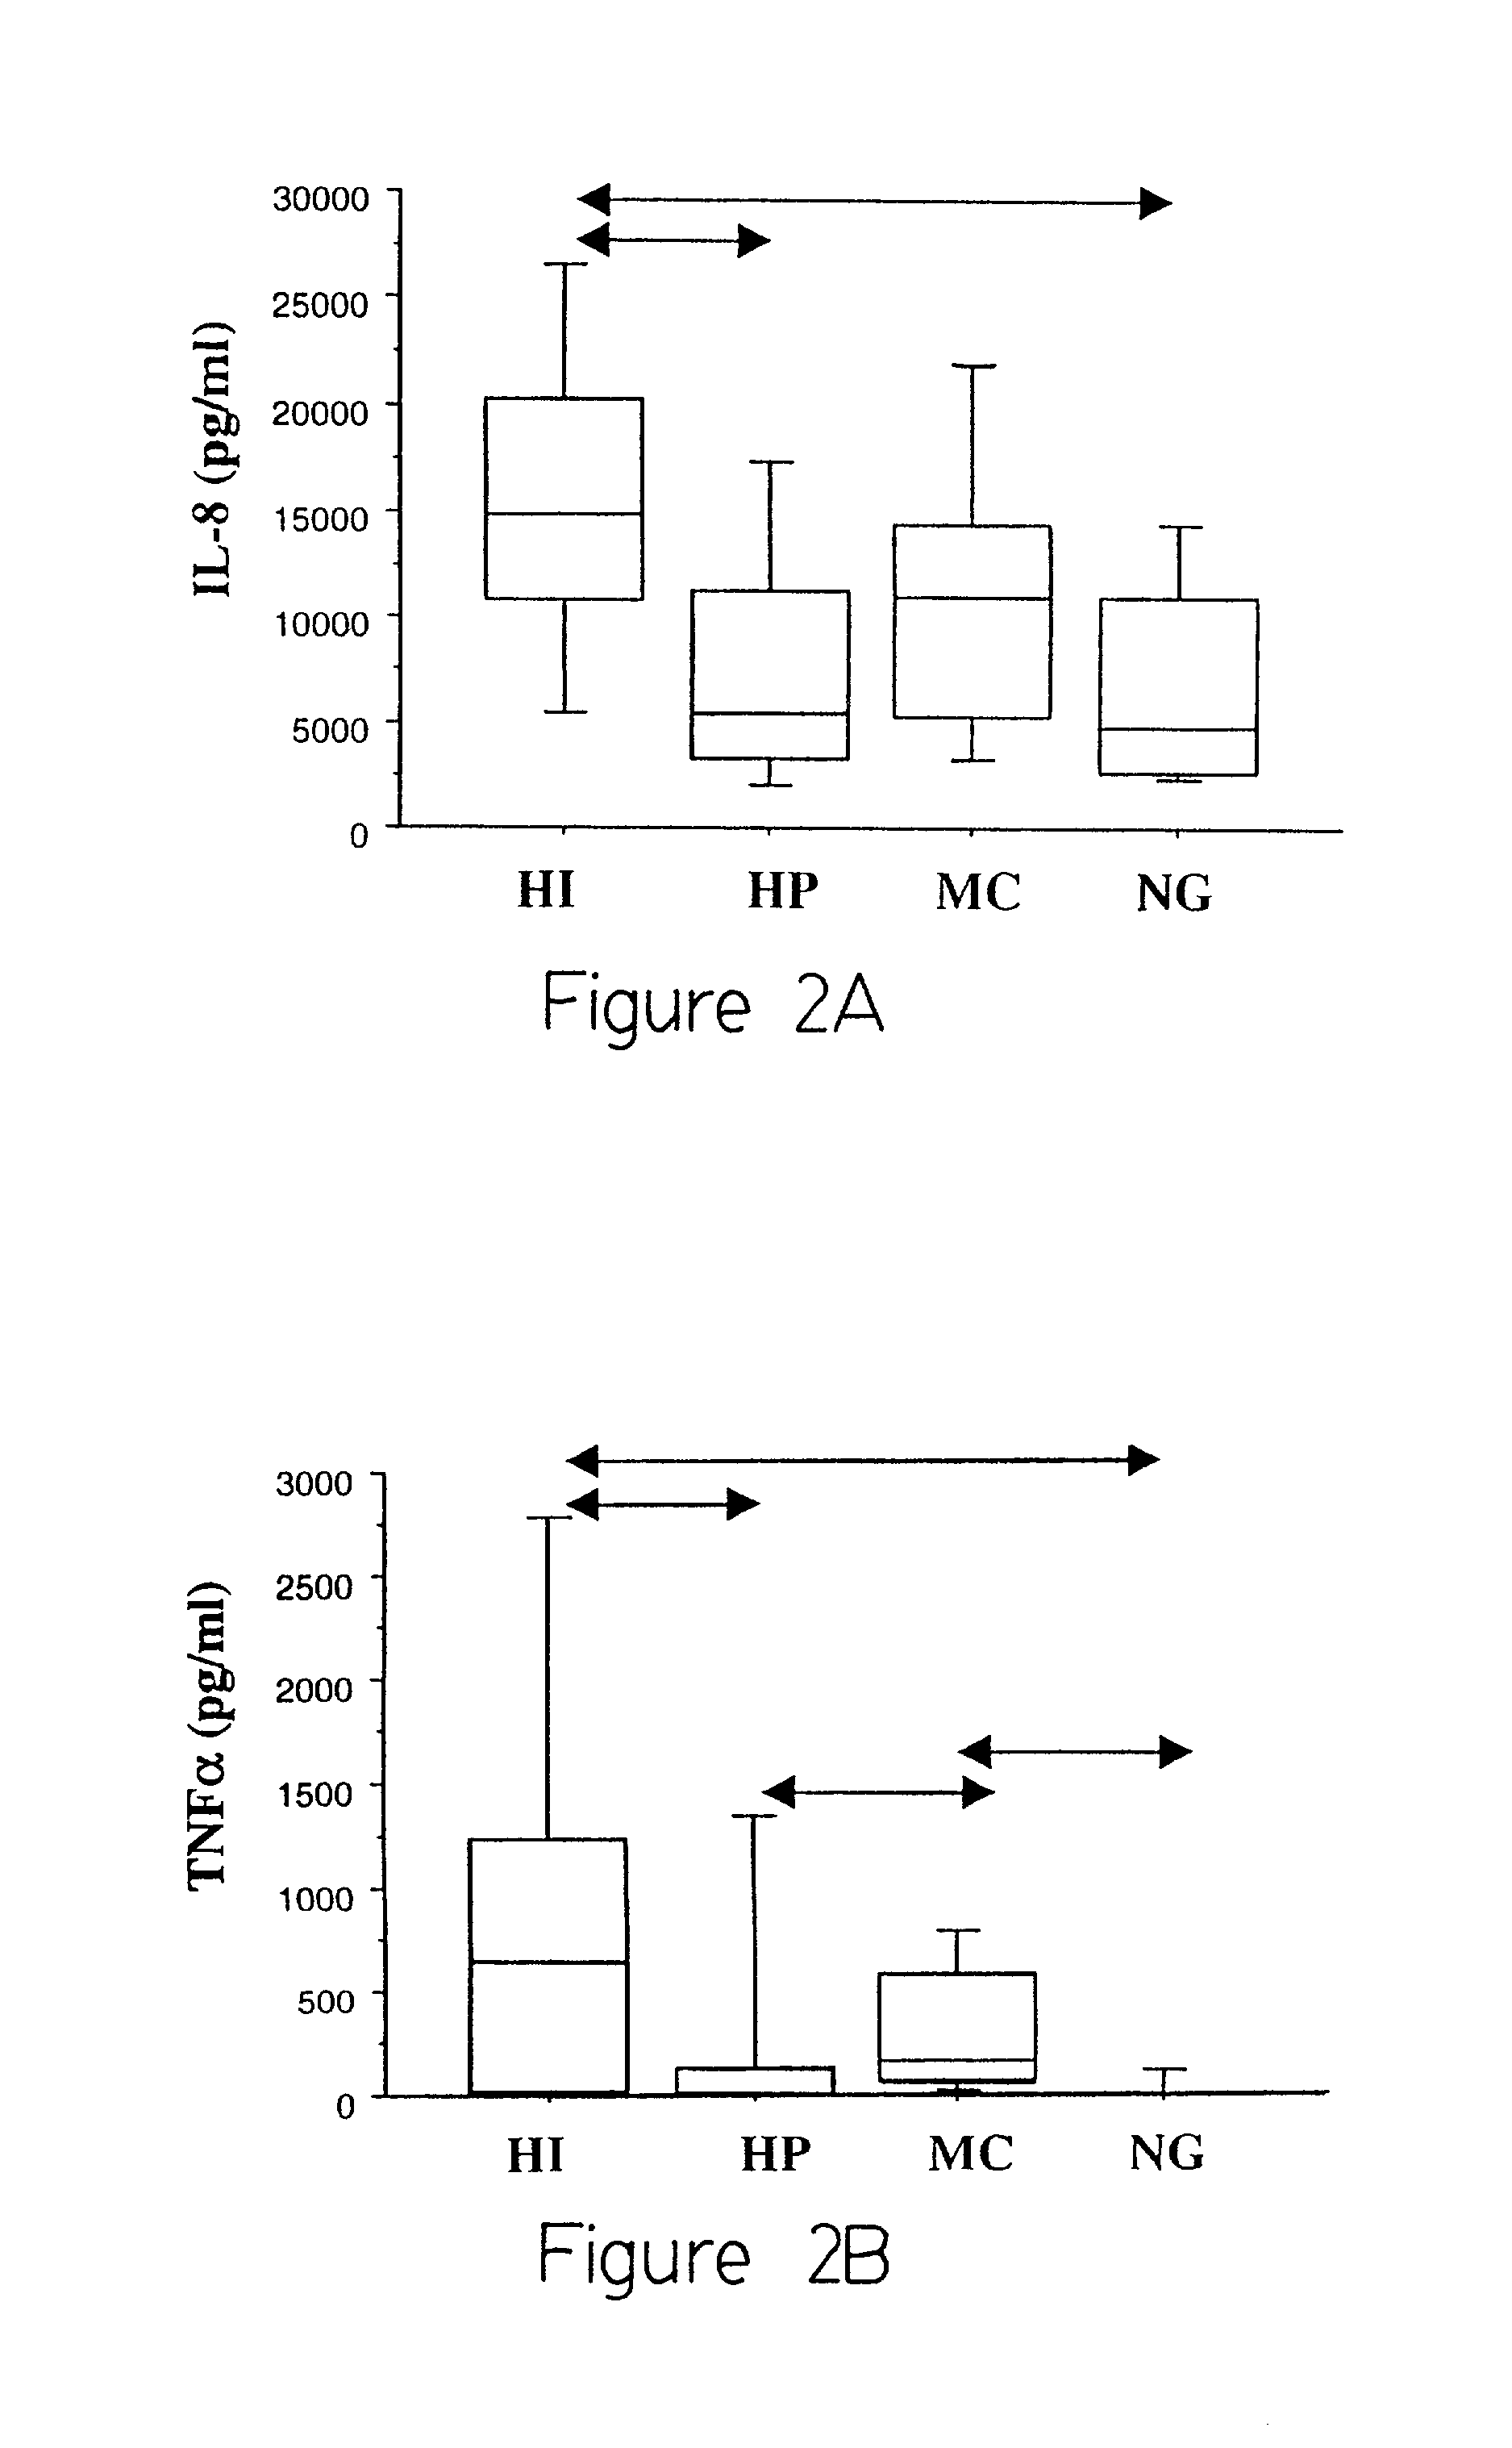 Method for detecting bacterial exacerbations of chronic lung disease